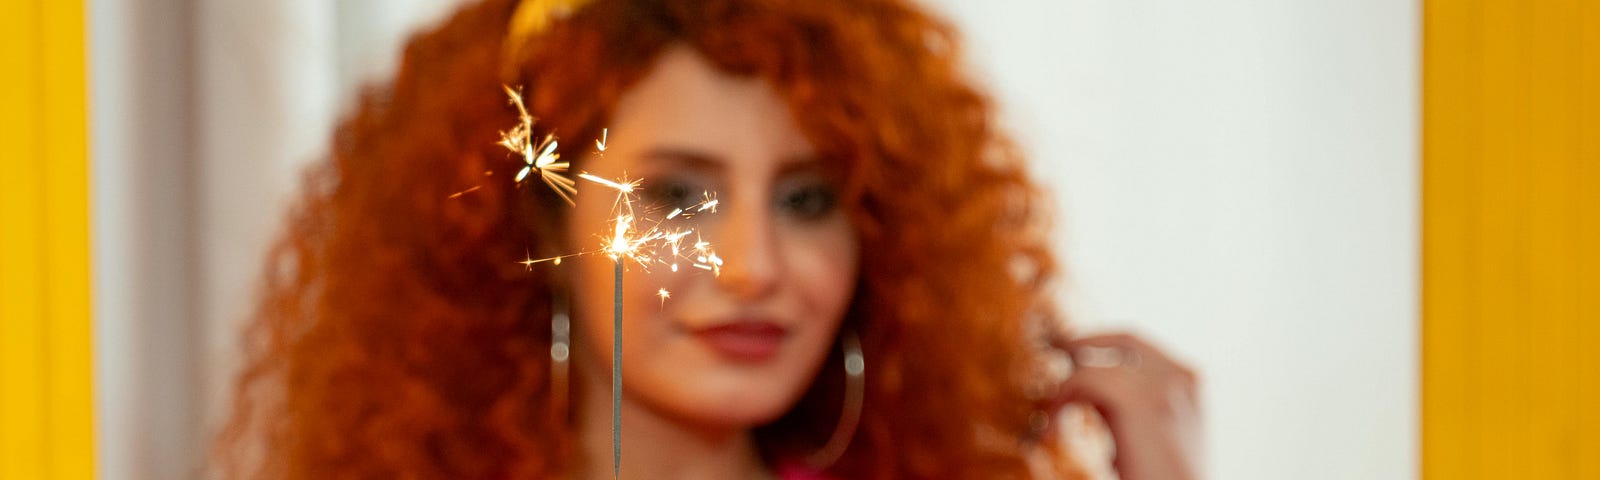 red haired girl smiling, holding sparkler over cake with flowers